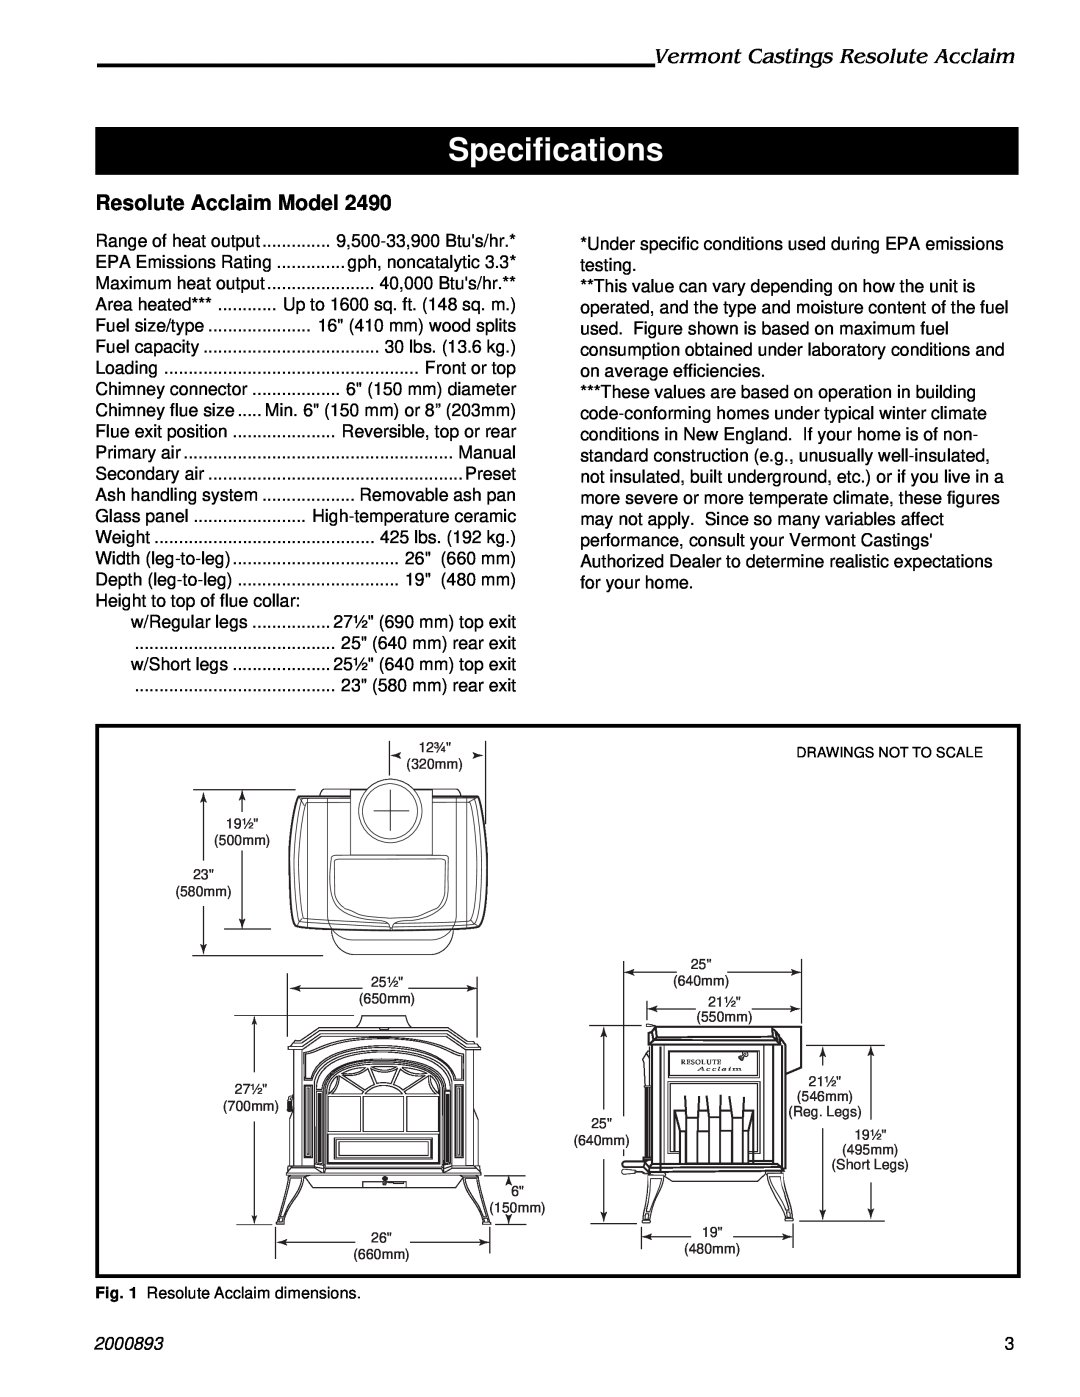 Majestic Appliances 2490 Specifications, Resolute Acclaim Model, Vermont Castings Resolute Acclaim, 2000893 